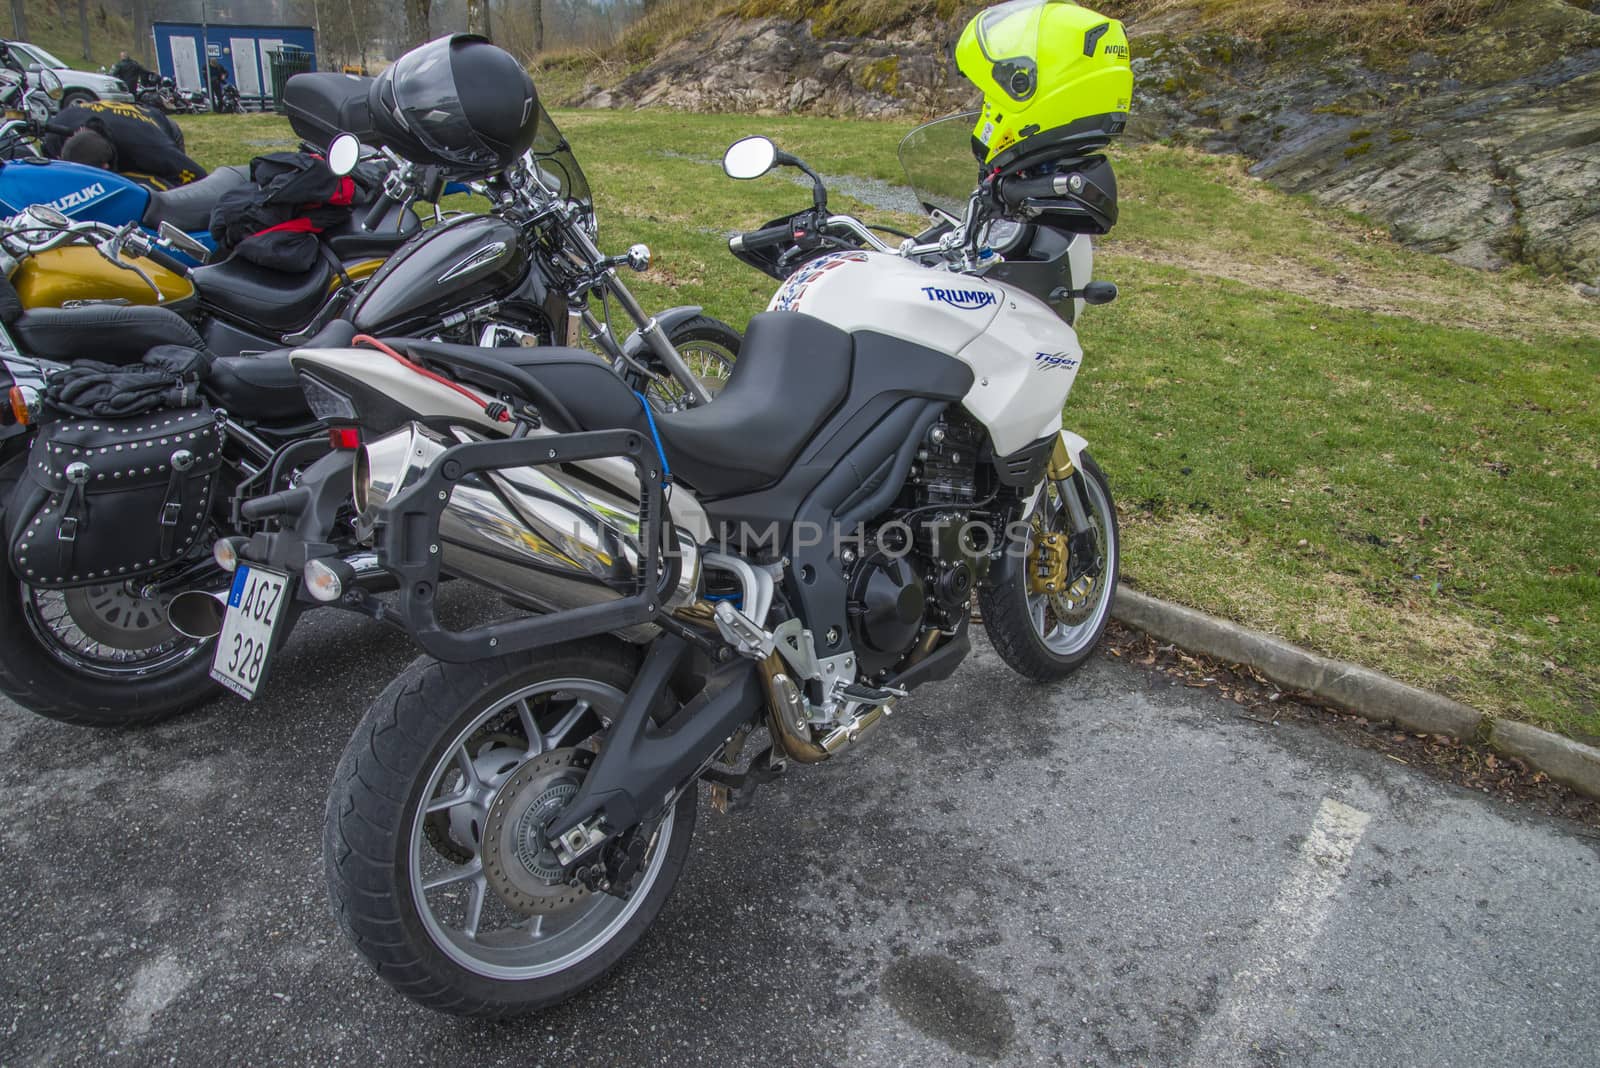 Every year in May there is a motorcycle meeting at Fredriksten fortress in Halden, Norway. In this photo Triumph Tiger 1050. 